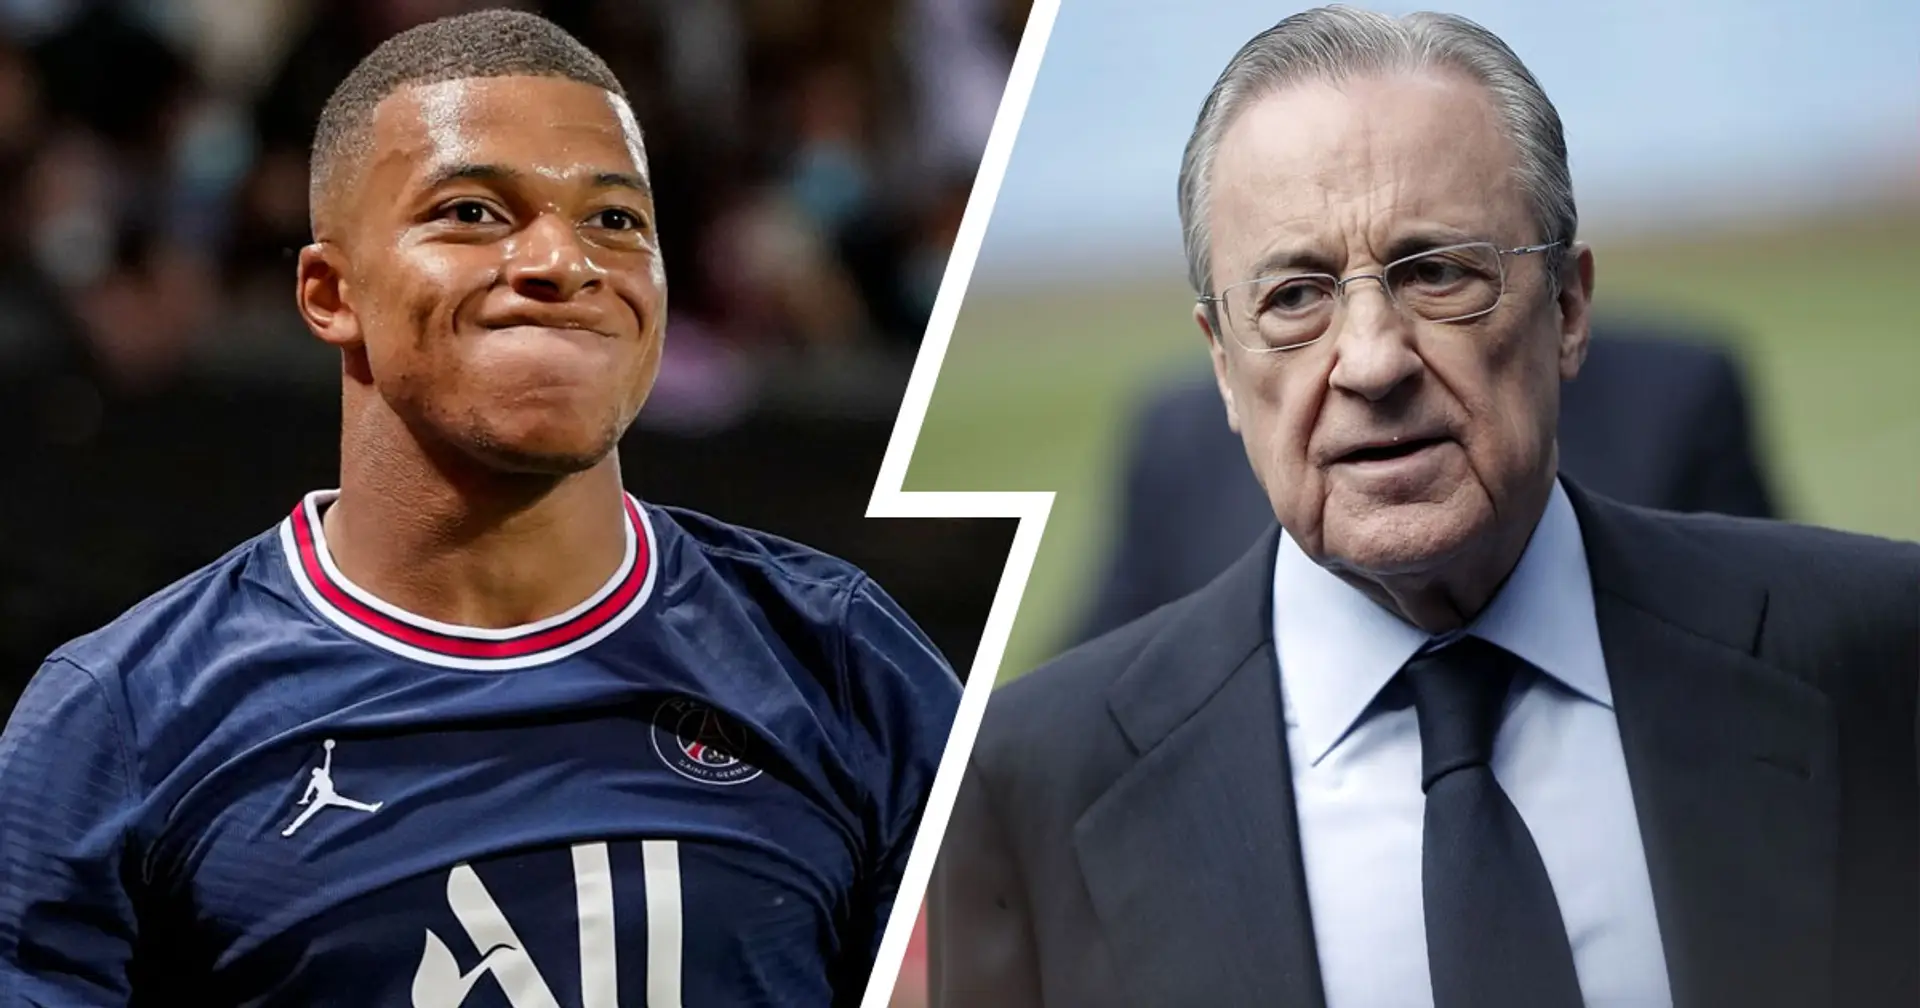 PSG were only willing to accept one player in Mbappe swap deal with Real Madrid